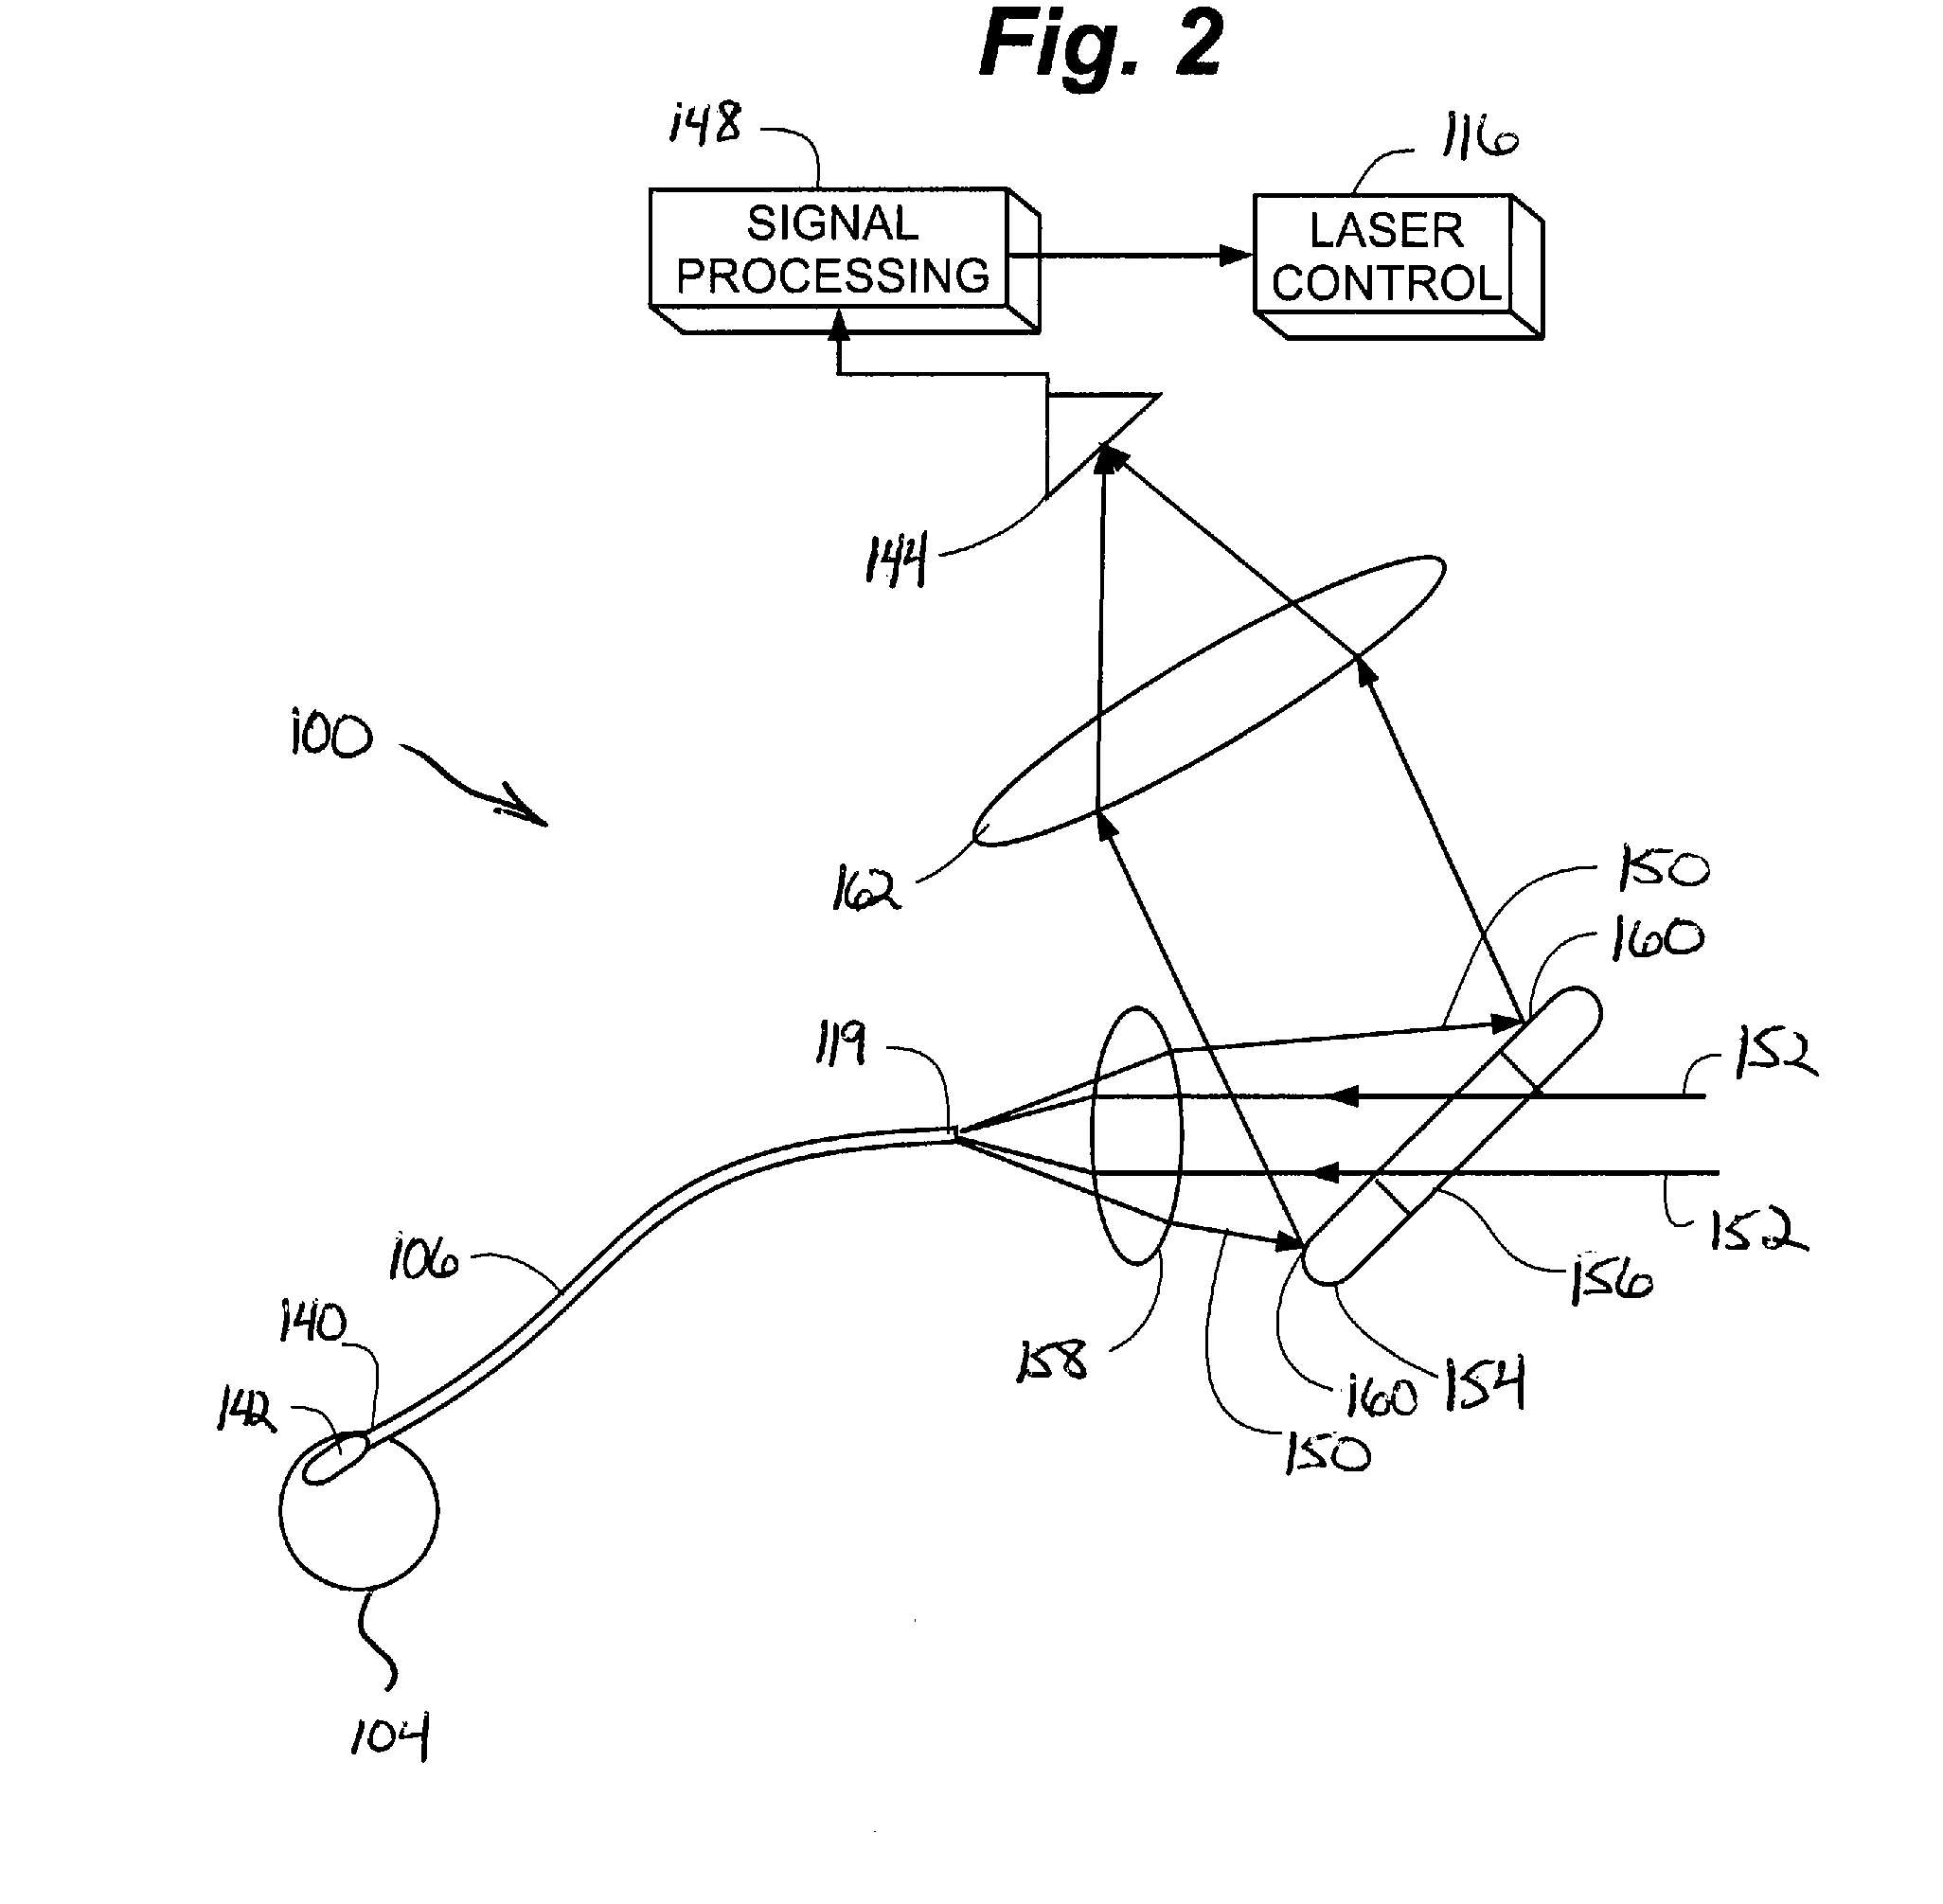 Fiber Damage Detection and Protection Device